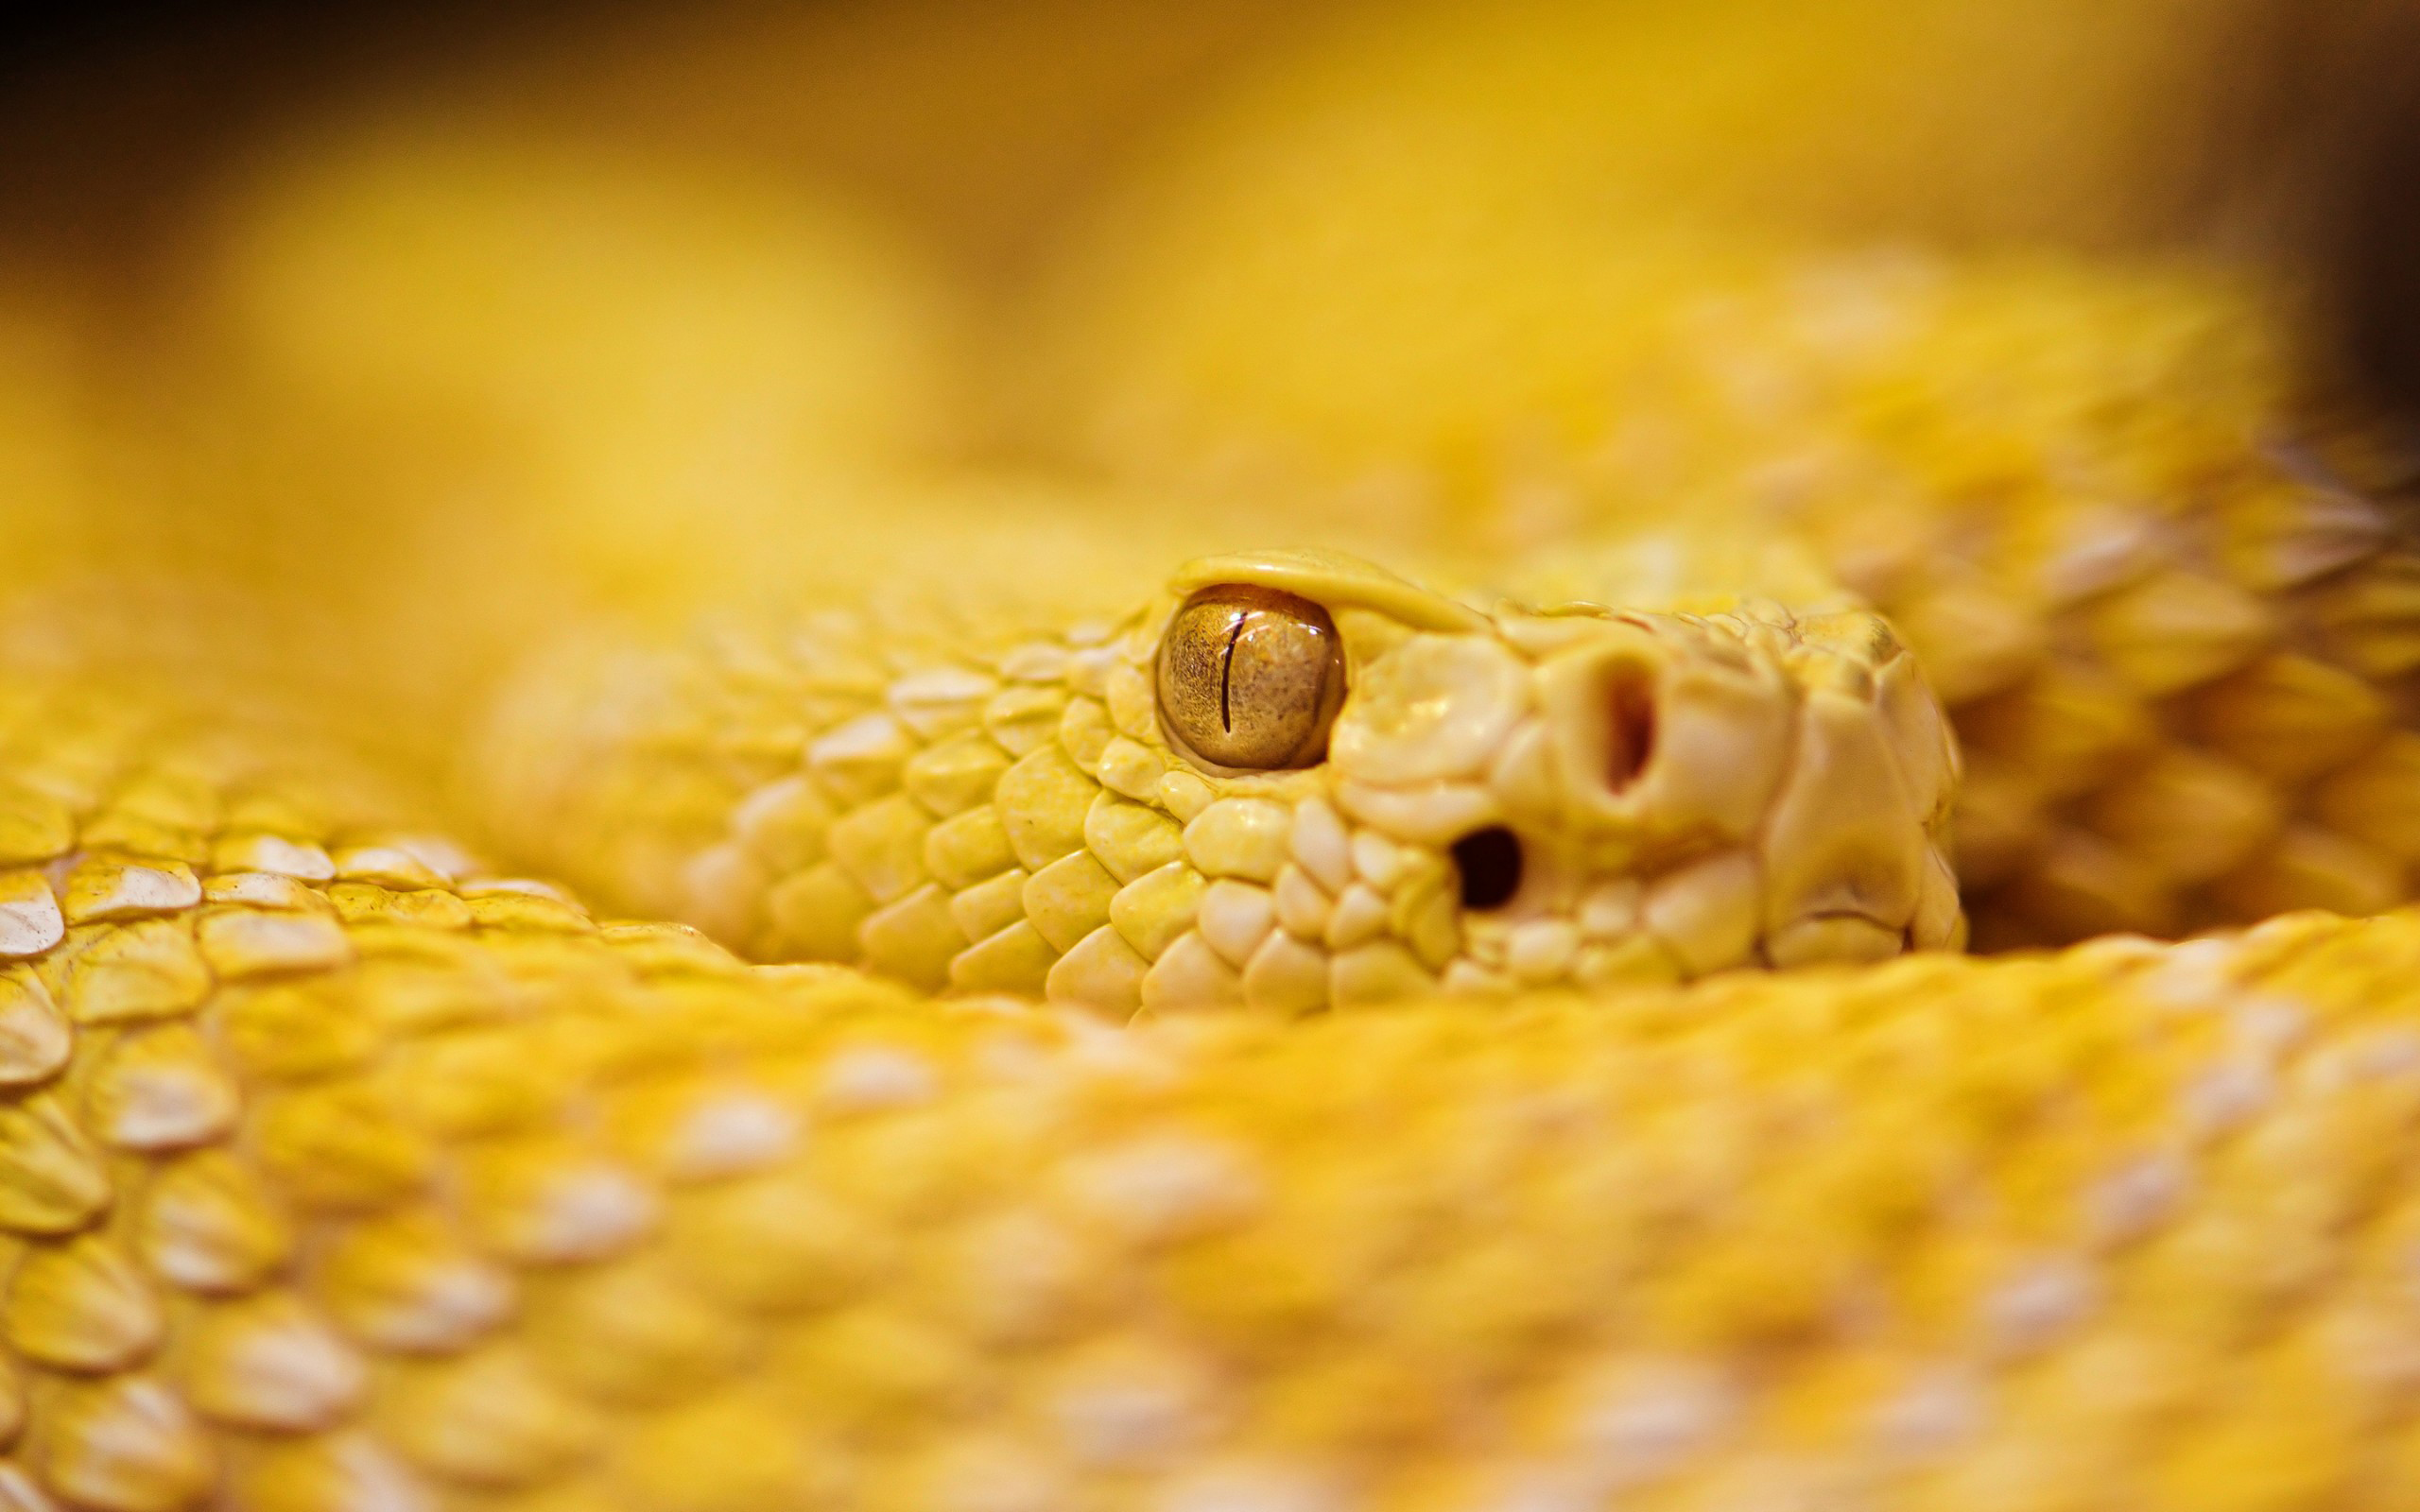 Snake HD Wallpaper | Background Image | 2560x1600 | ID:407483 - Wallpaper Abyss